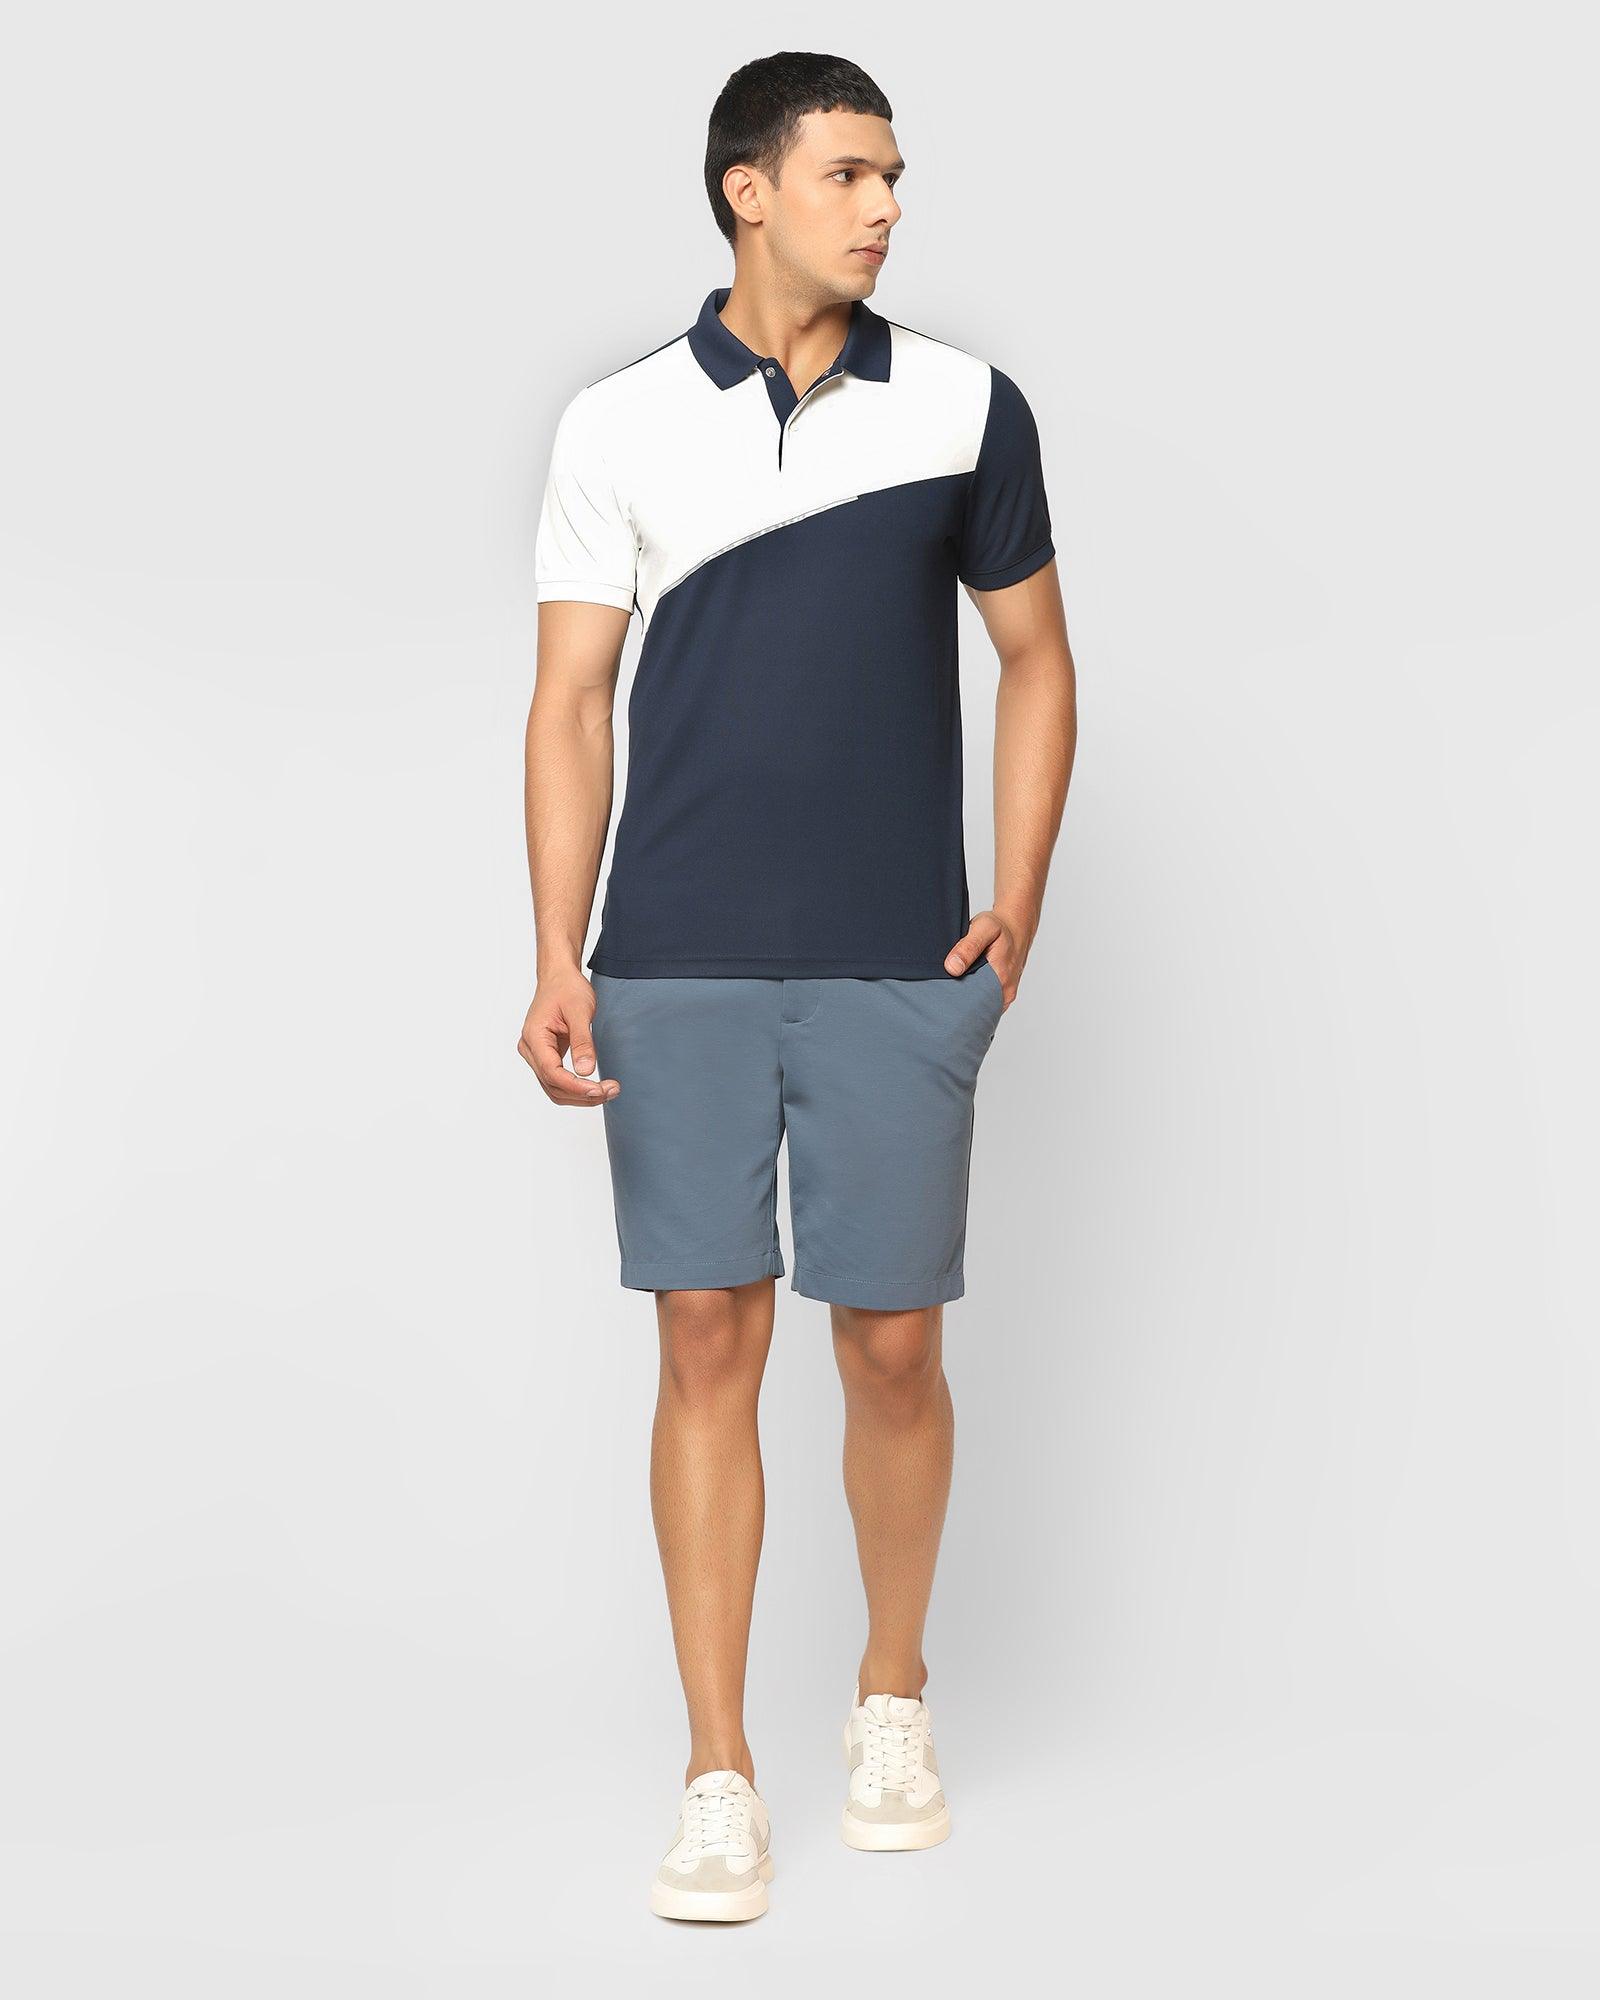 TechPro Casual Petrol Blue Solid Shorts - Serry